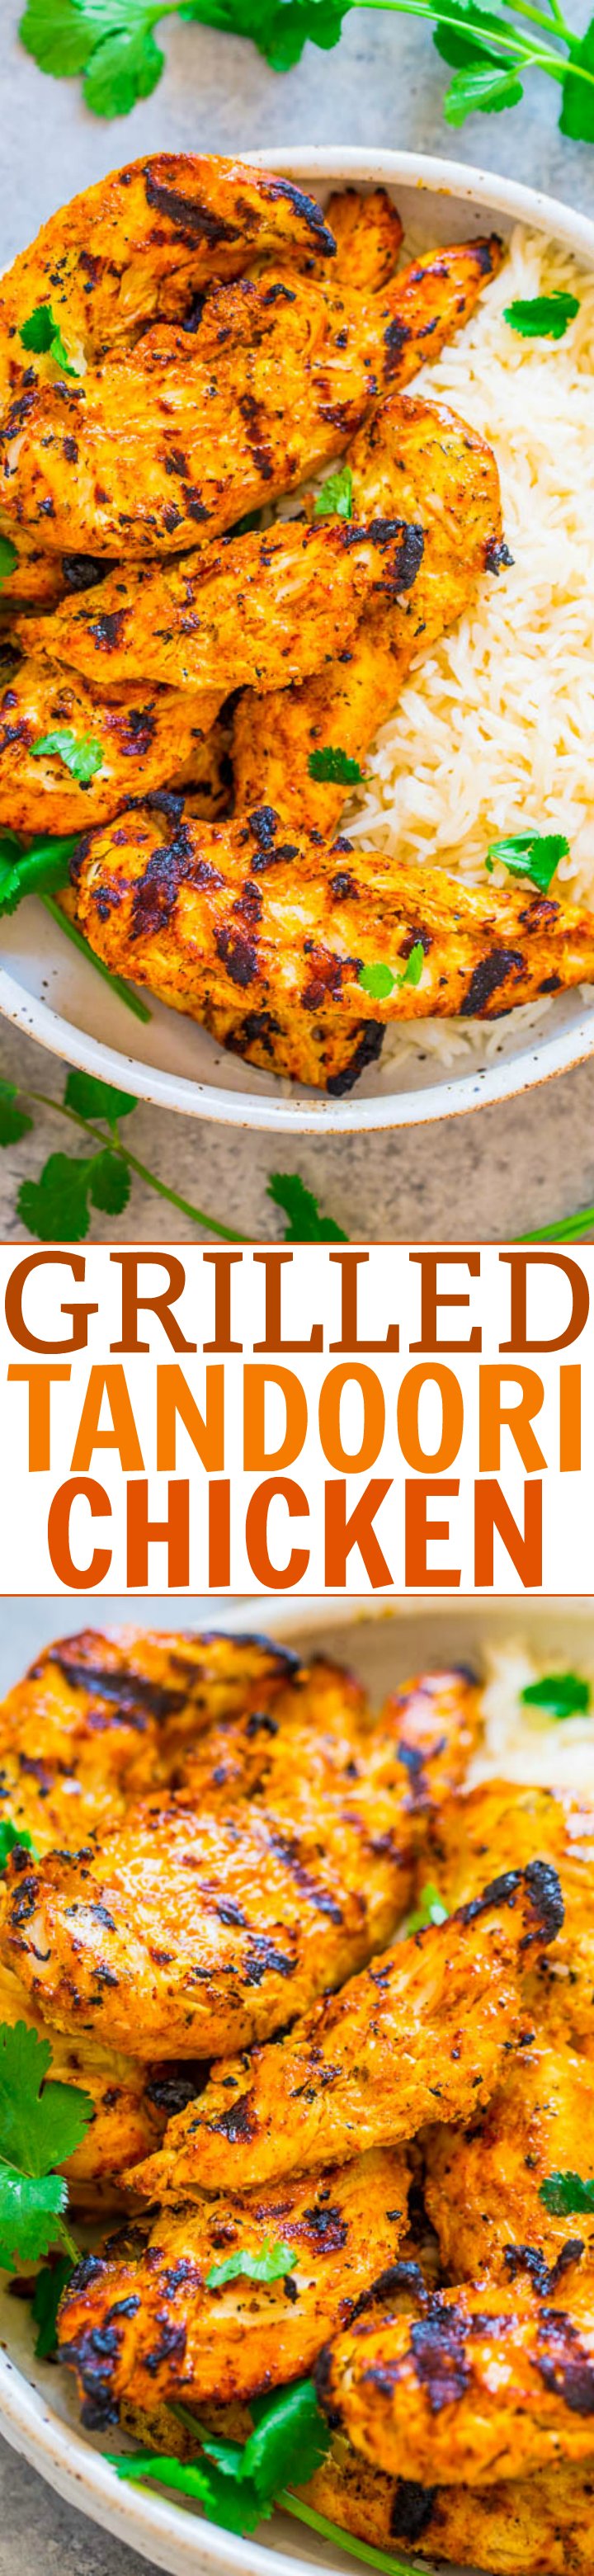 Grilled Tandoori Chicken - Recreate this Indian favorite QUICKLY and EASILY at home!! If you're looking for a new spin on grilled chicken, this is THE recipe to try! Super juicy, flavorful, and you'll LOVE IT!!